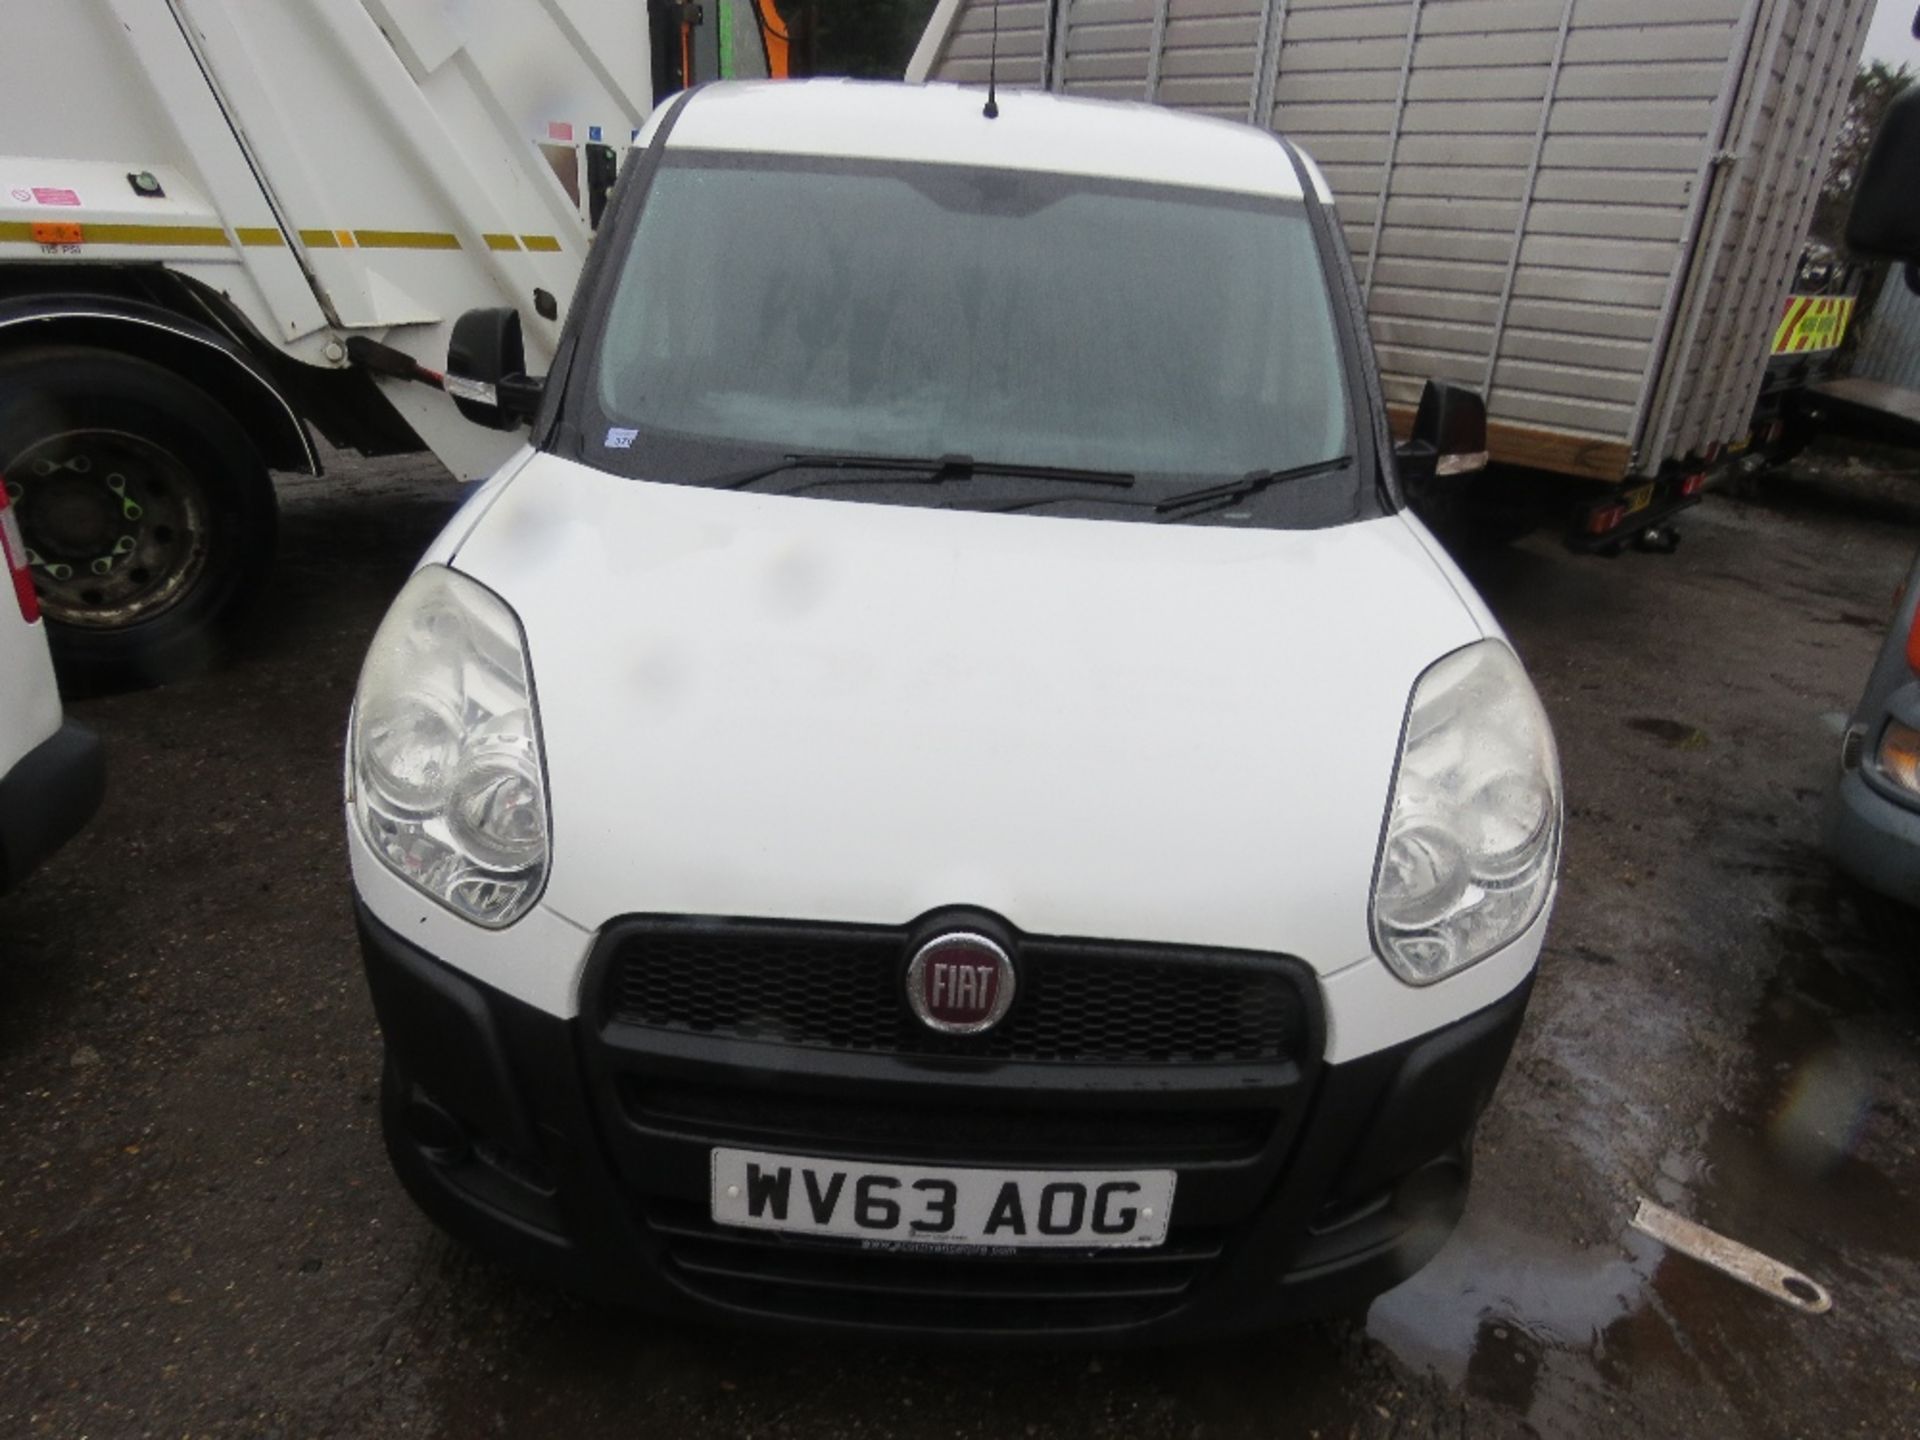 FIAT DOBLO PANEL VAN REG:WV63 AOG. MOT UNTIL 23/03/24. WHEN TESTED WAS SEEN TO DRIVE, ST - Image 2 of 11